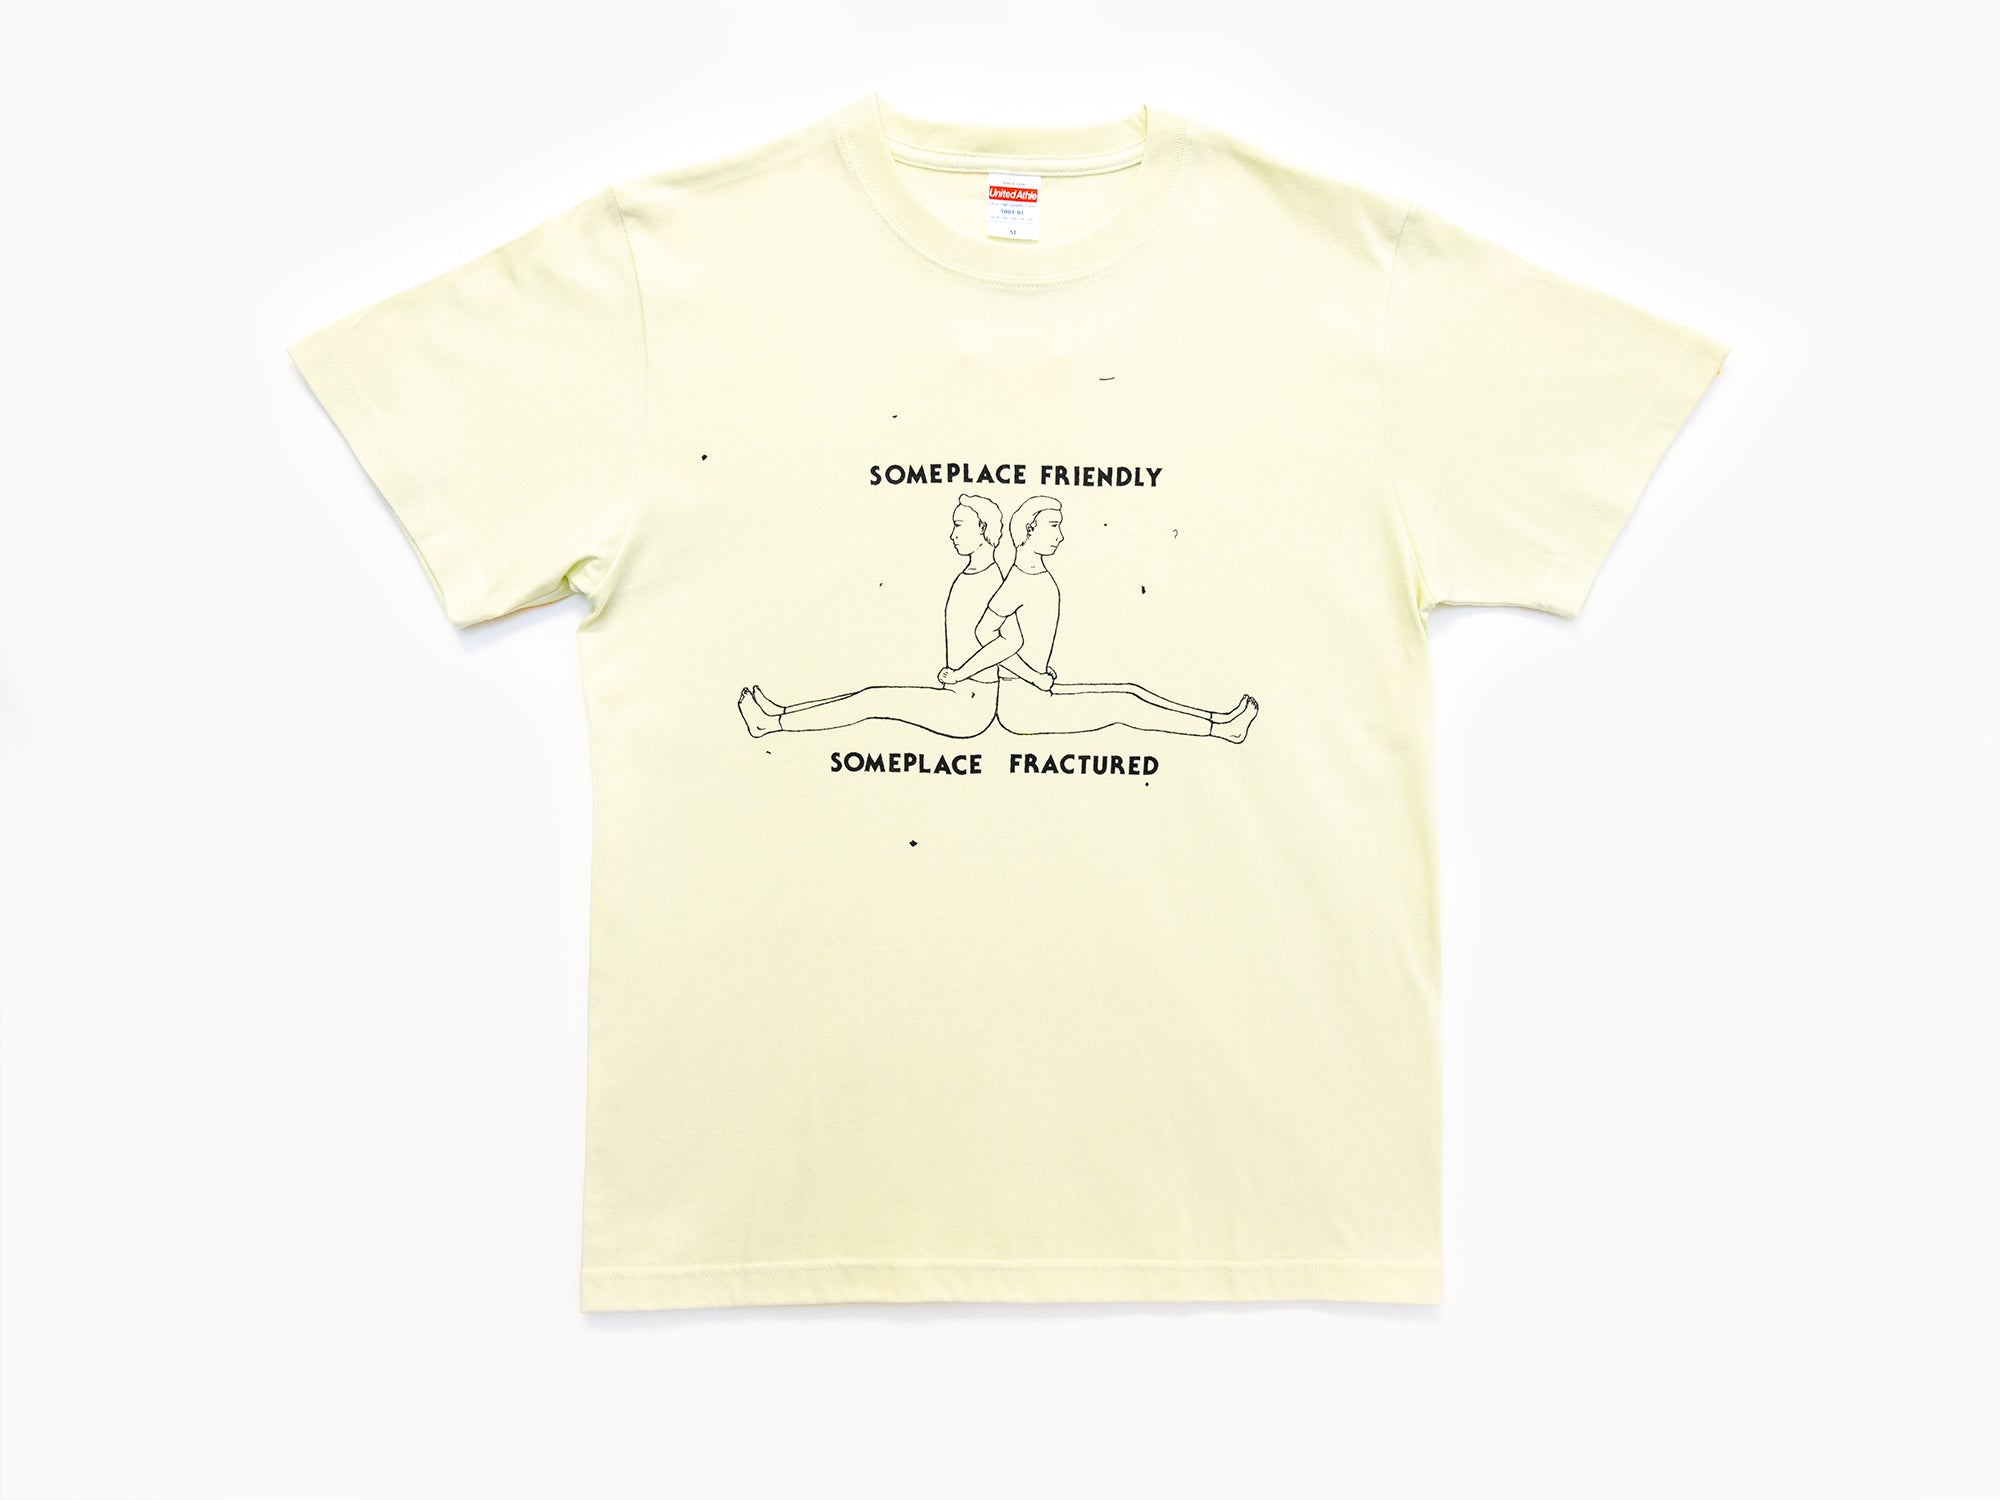 Barry McGee - T-shirt "Someplace Friendly, Someplace Fractured